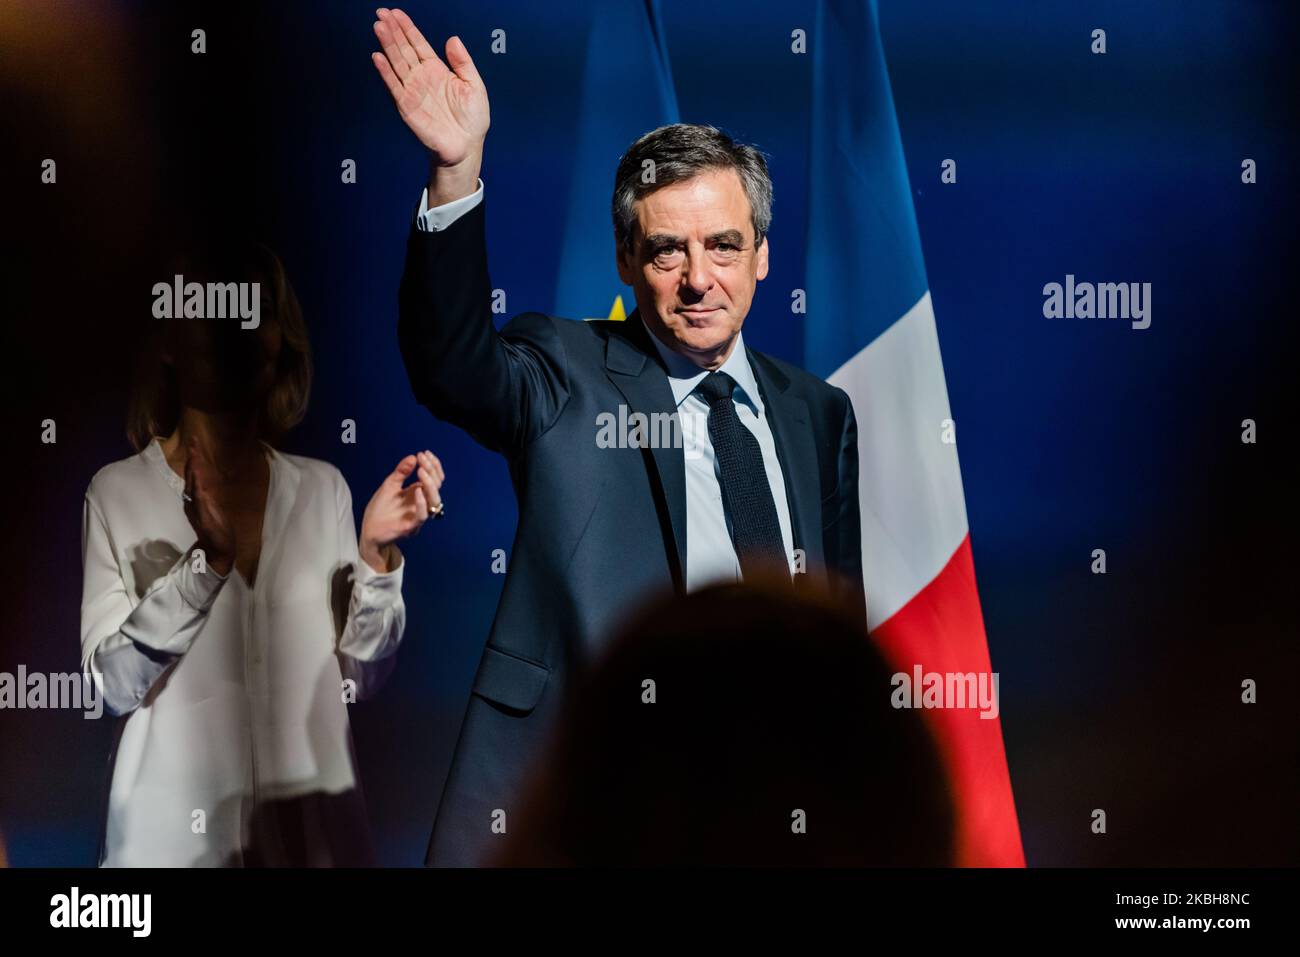 Portrait of François Fillon in a meeting with civil society at the Docks de Paris in Aubervilliers on March 4, 2017, while the trial of François Fillon and Penelope Fillon for 'fictitious employment' and embezzlement opens on February 24, 2020 at the Tribunal de Grande Instance de Paris for the so-called Penelope Gate case, a review of the campaign of Les Républicains (LR) candidate François Fillon for the 2017 presidential election during which the case was revealed. (Photo by Samuel Boivin/NurPhoto) Stock Photo